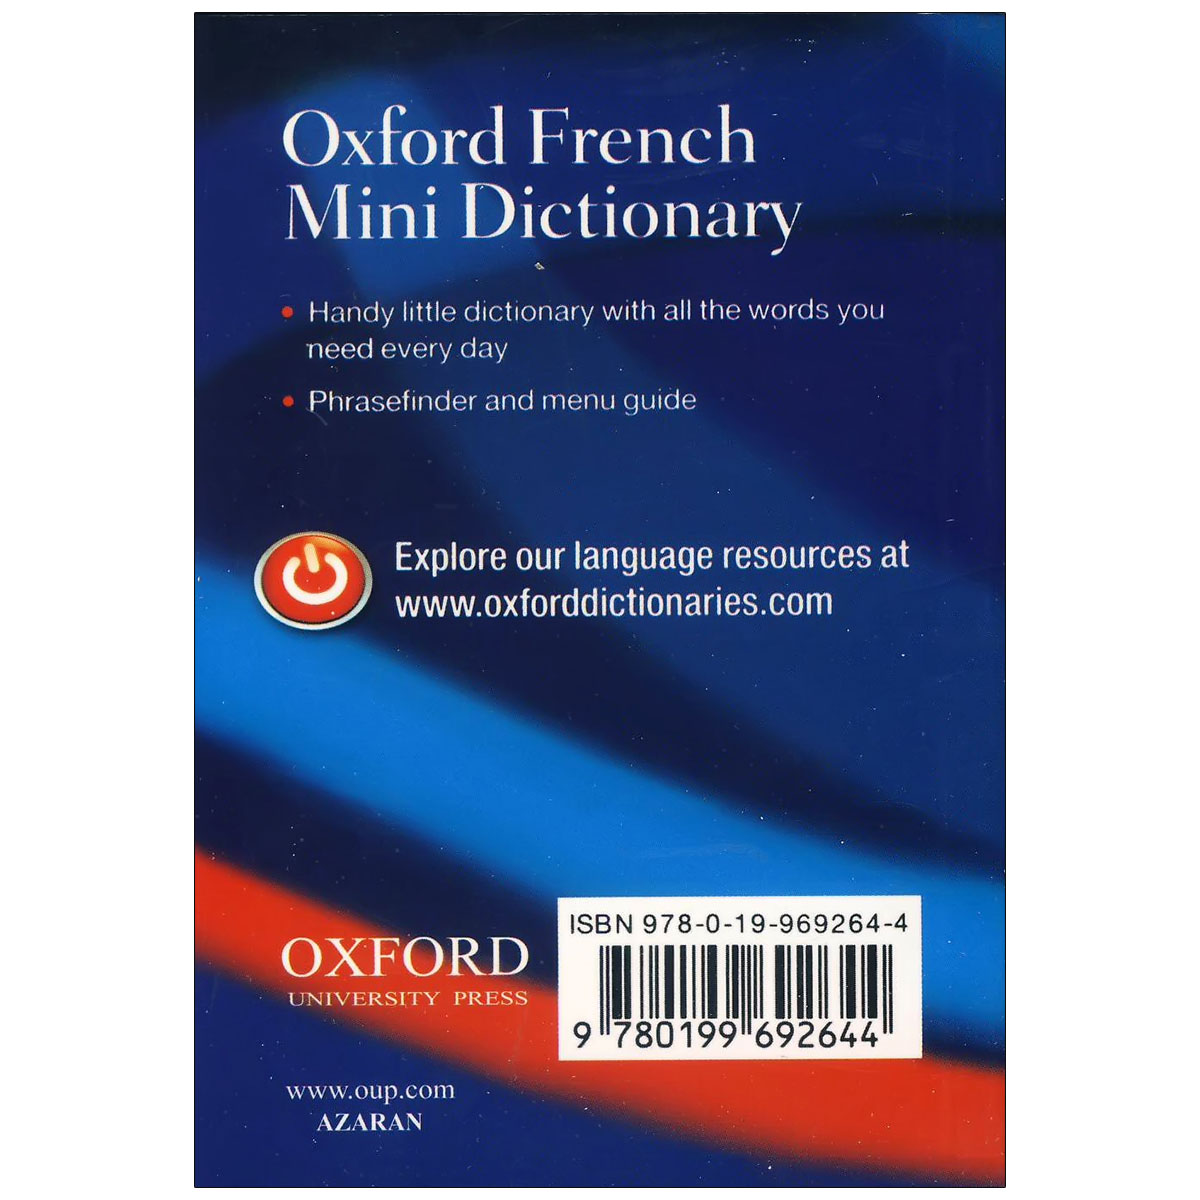 oxford-French-Mini-Dictionary-back